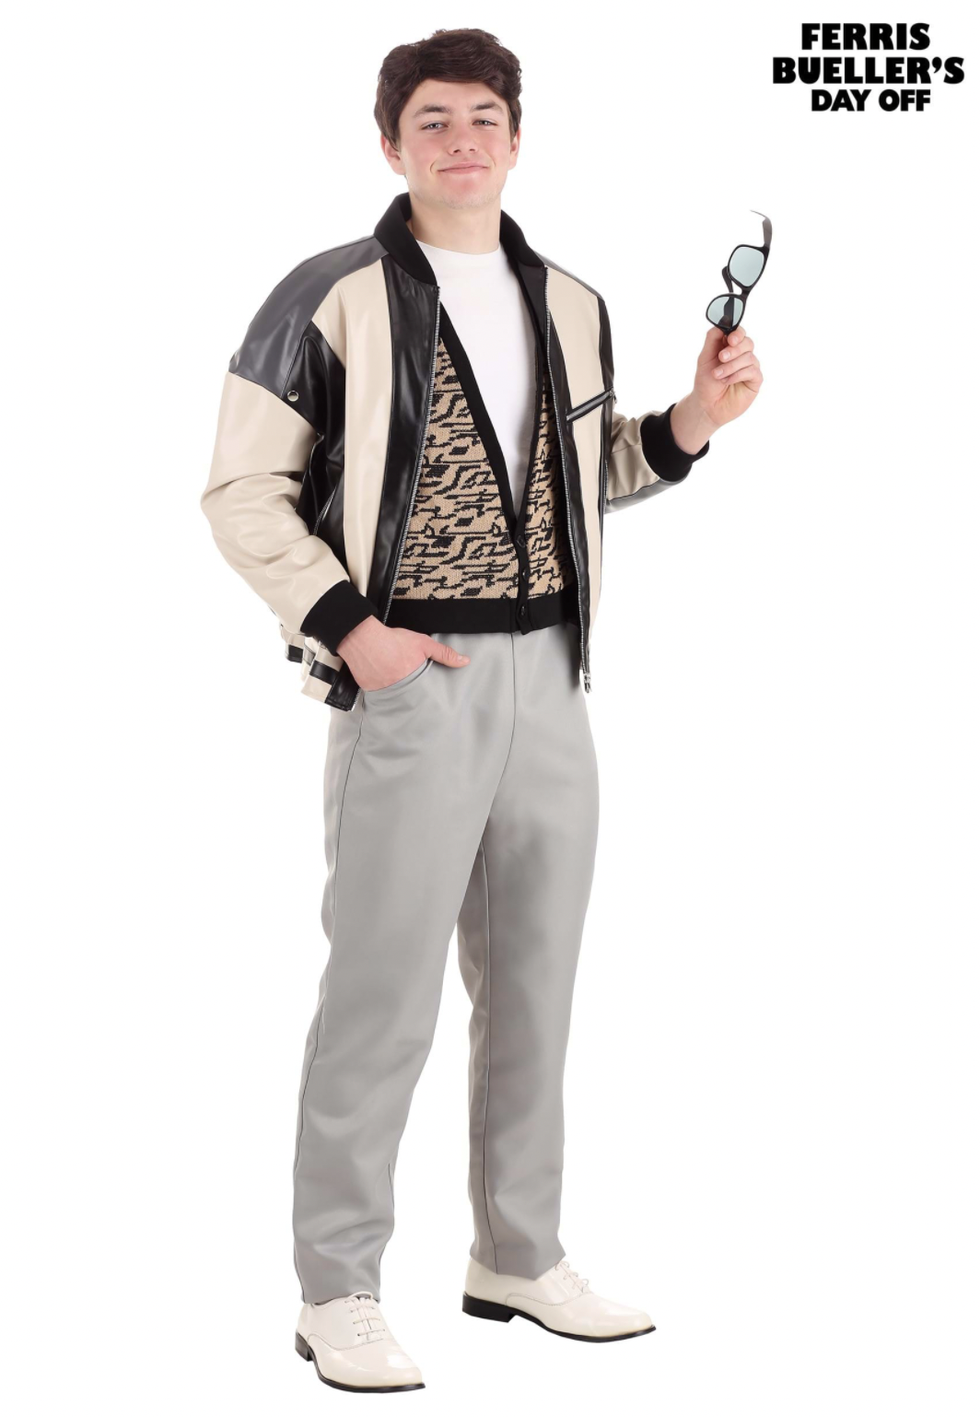 50 Best '80s Halloween Costumes 2023 - DIY '80s Outfit Ideas